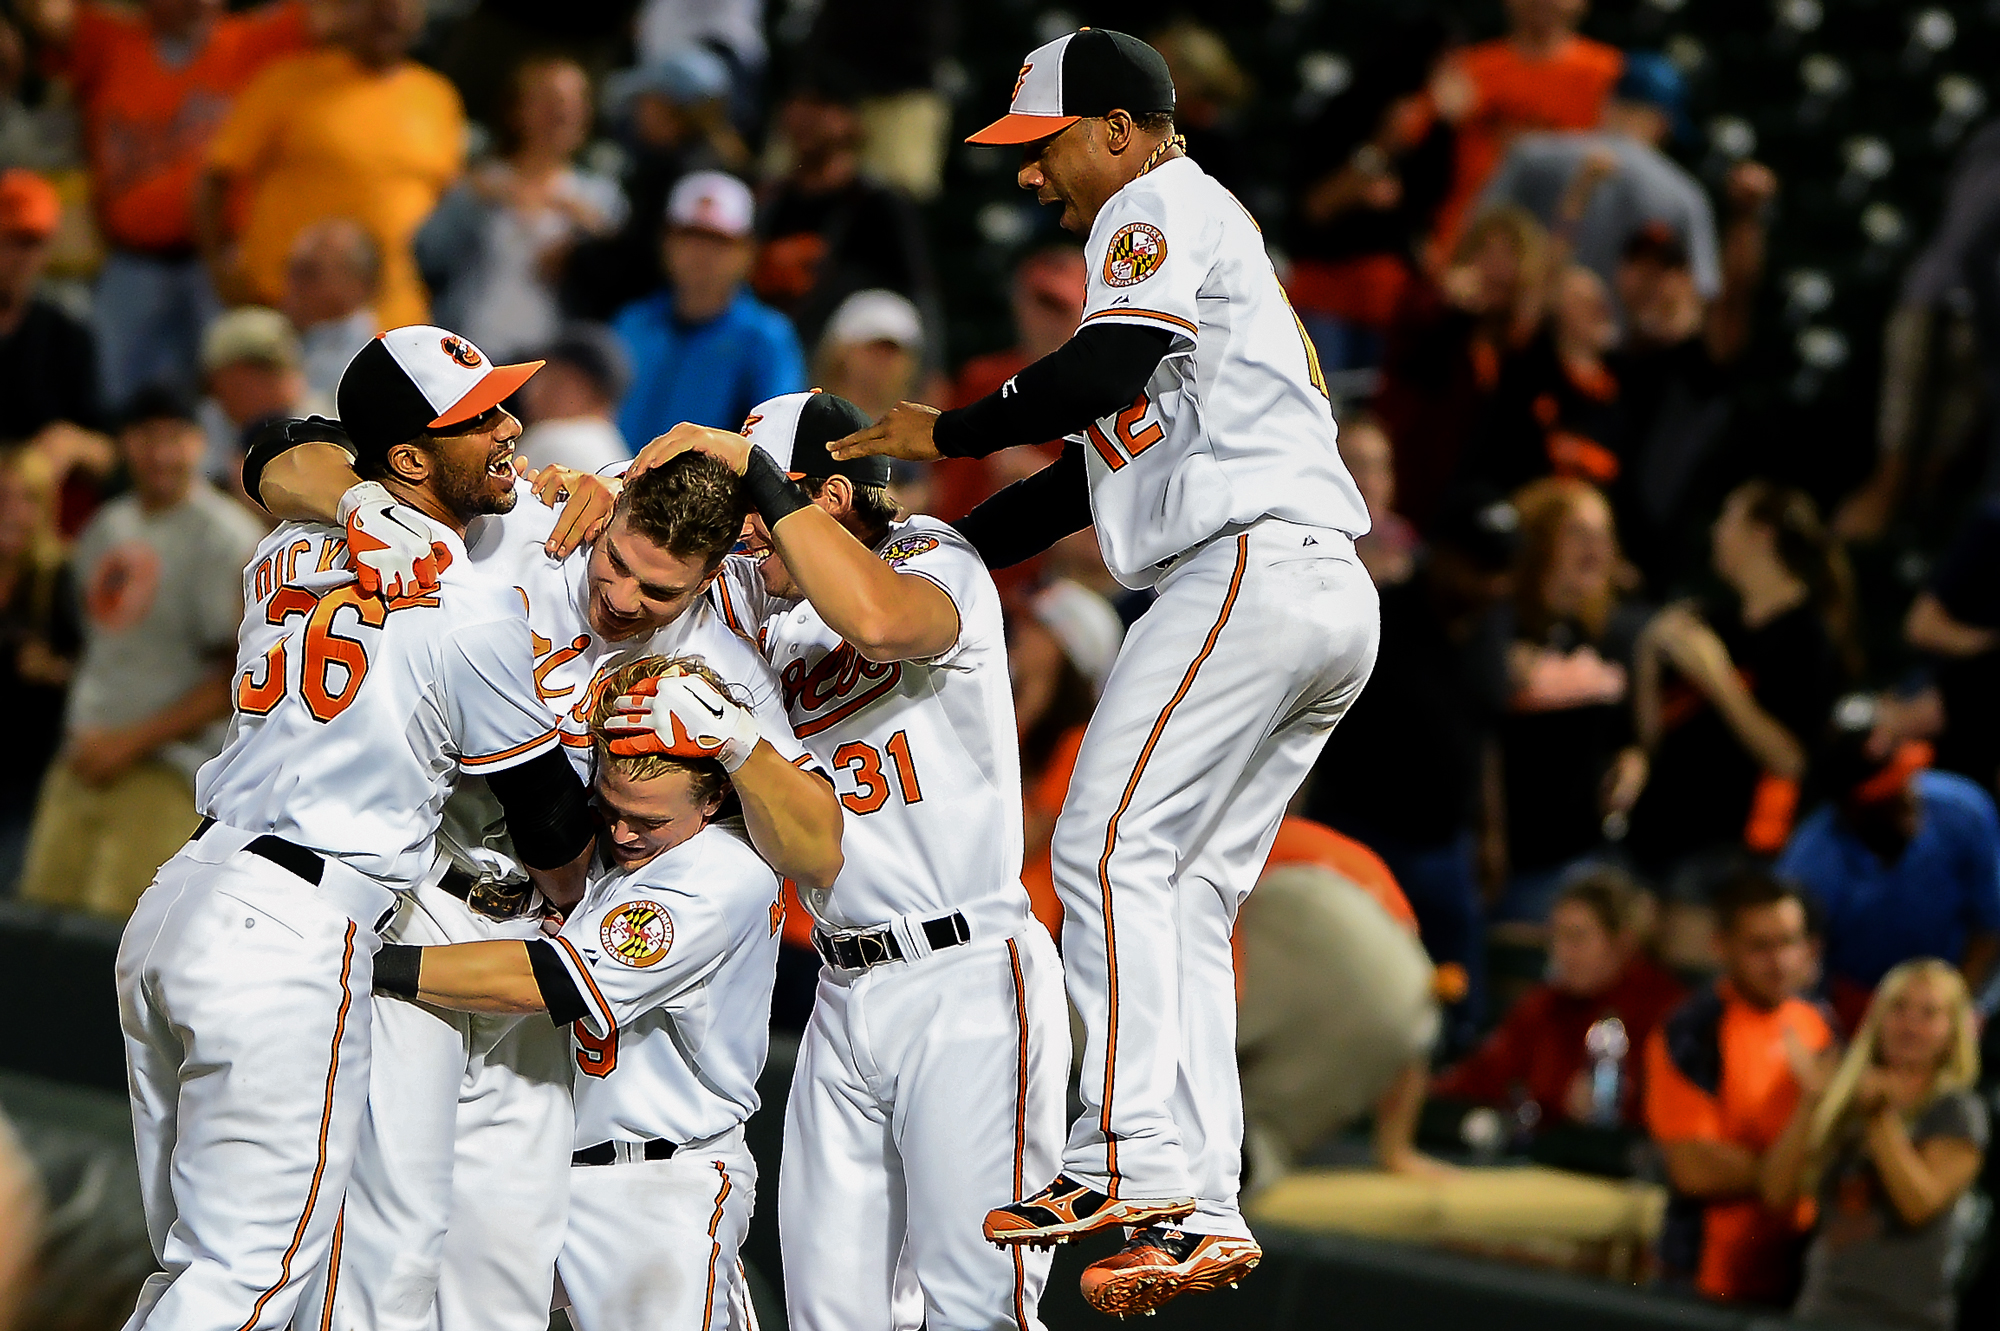  Chris Davis of the Baltimore Orioles is mobbed by his teammates after hitting the game winning RBI&nbsp;in the 13th inning against the Boston Red Sox at Oriole Park at Camden Yards on June 13, 2013 in Baltimore, Md. 